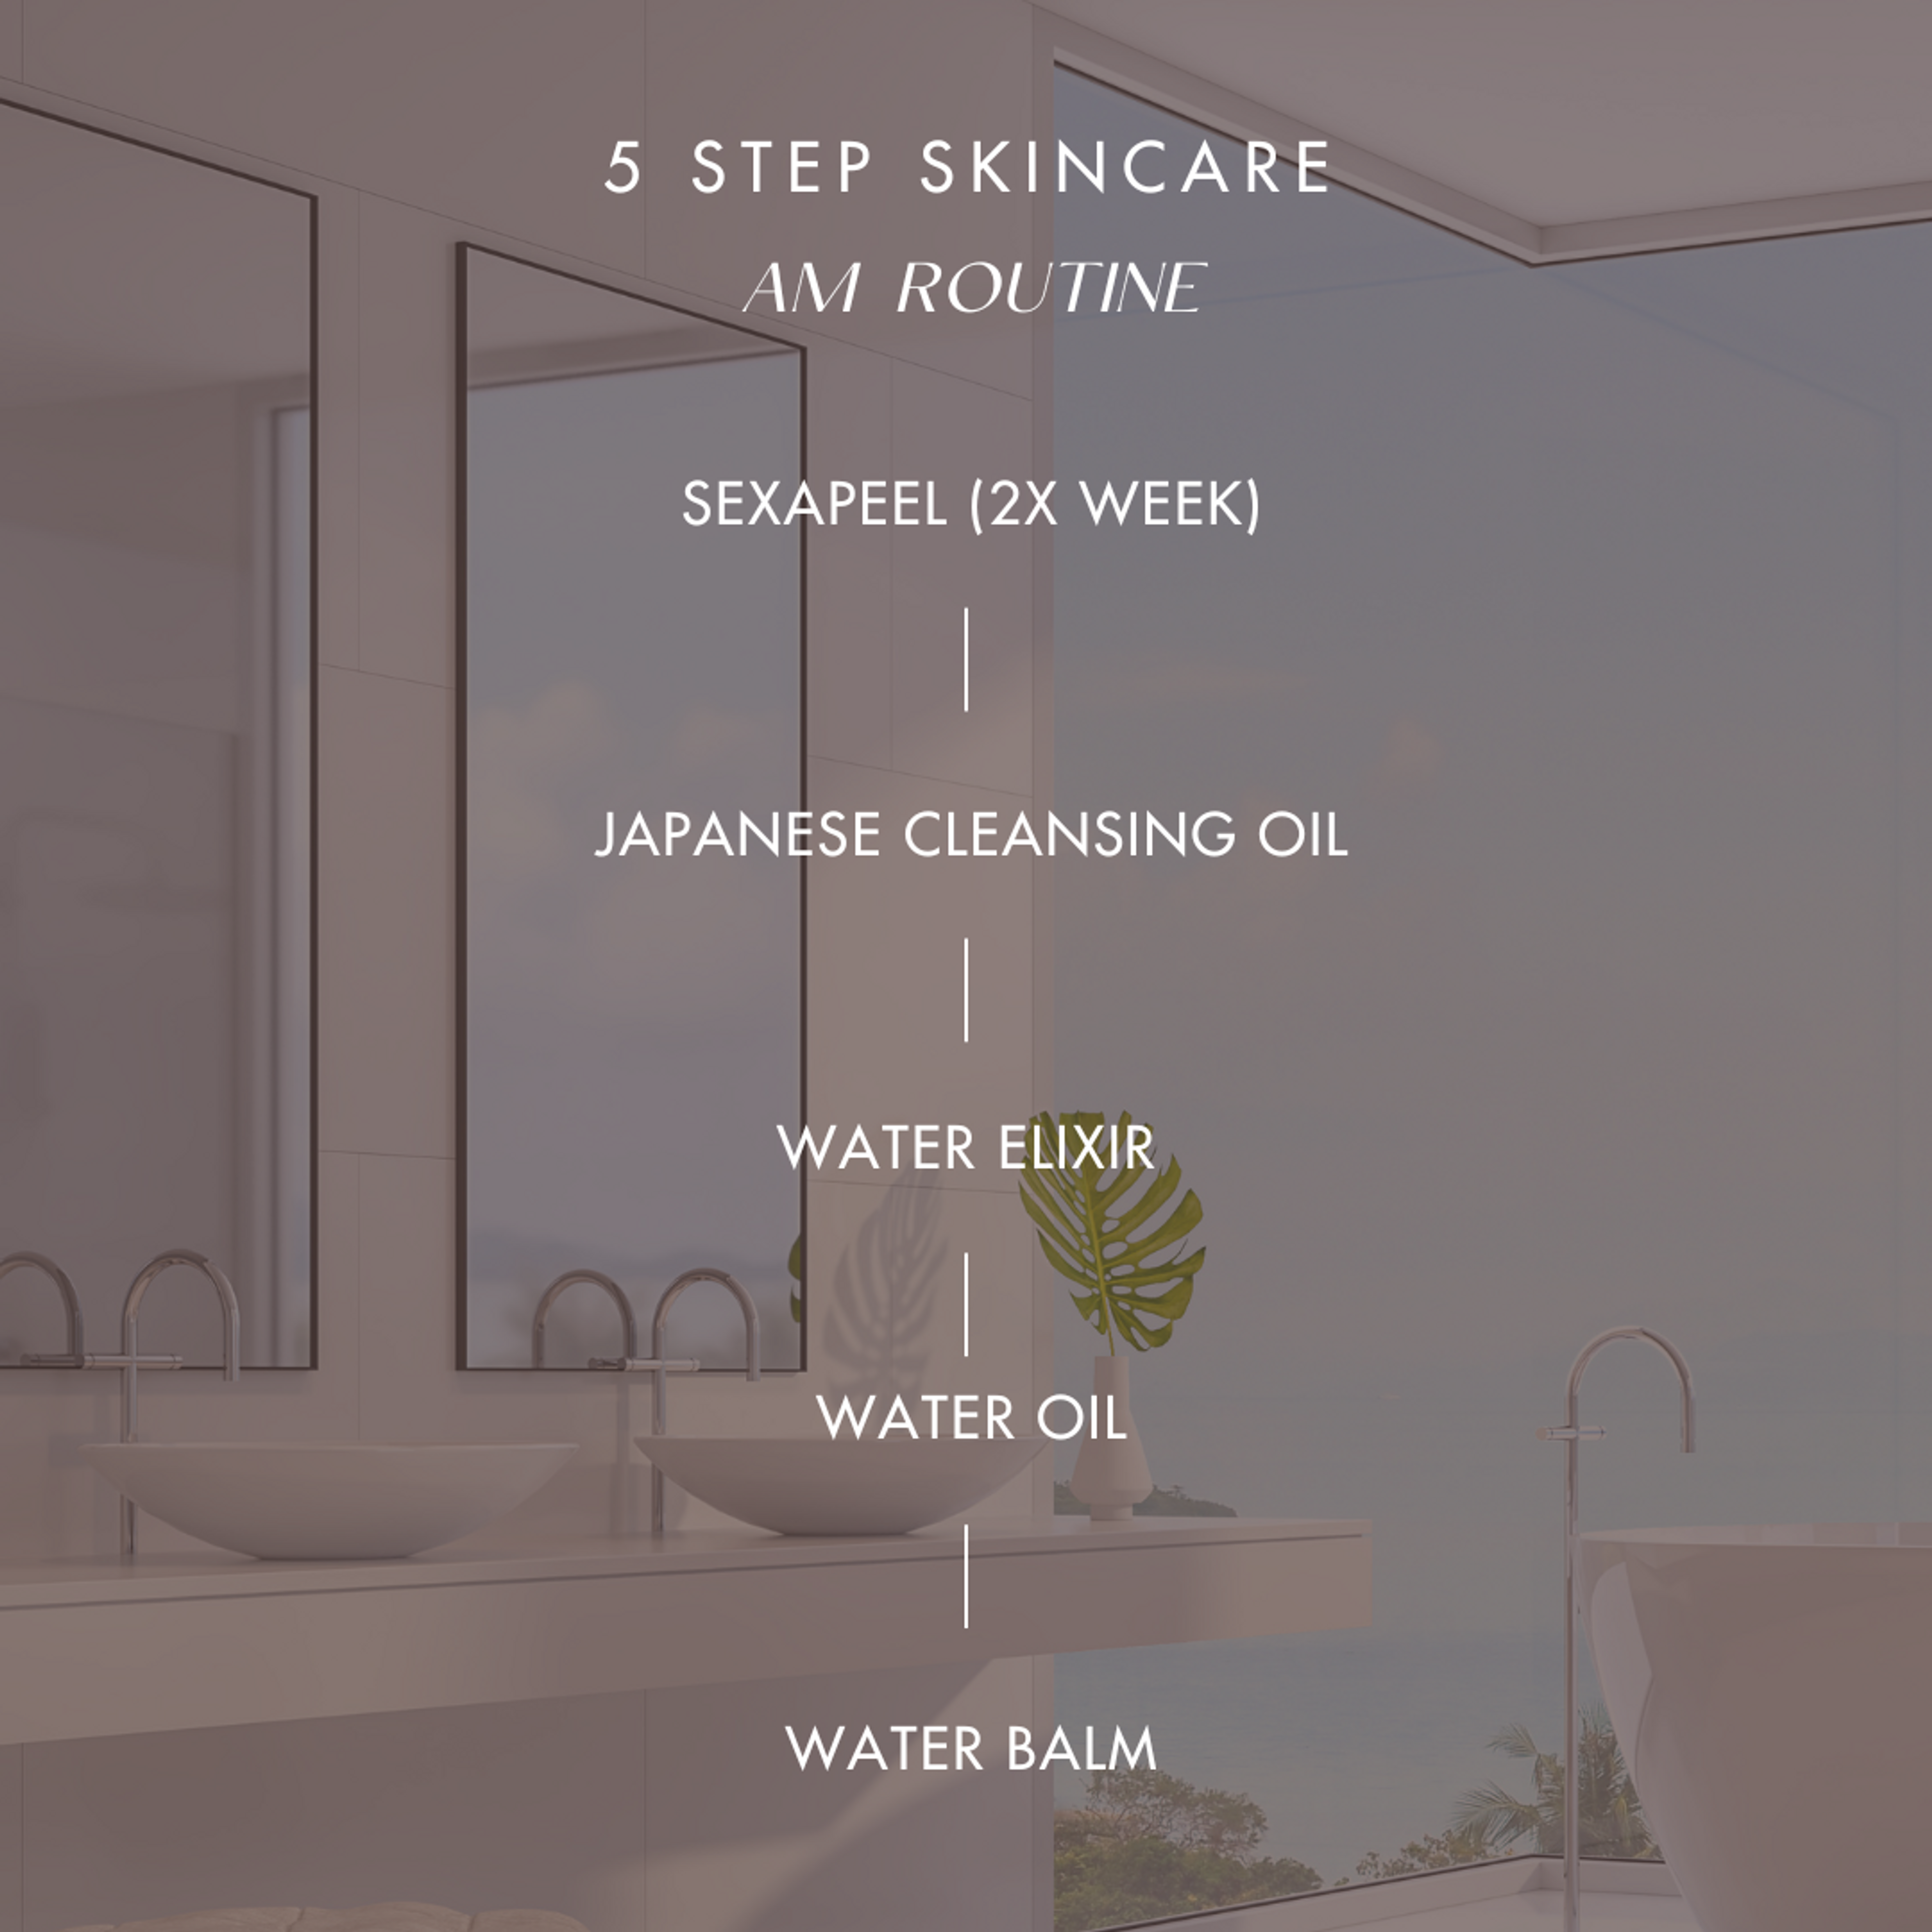 Japanese Cleansing Oil